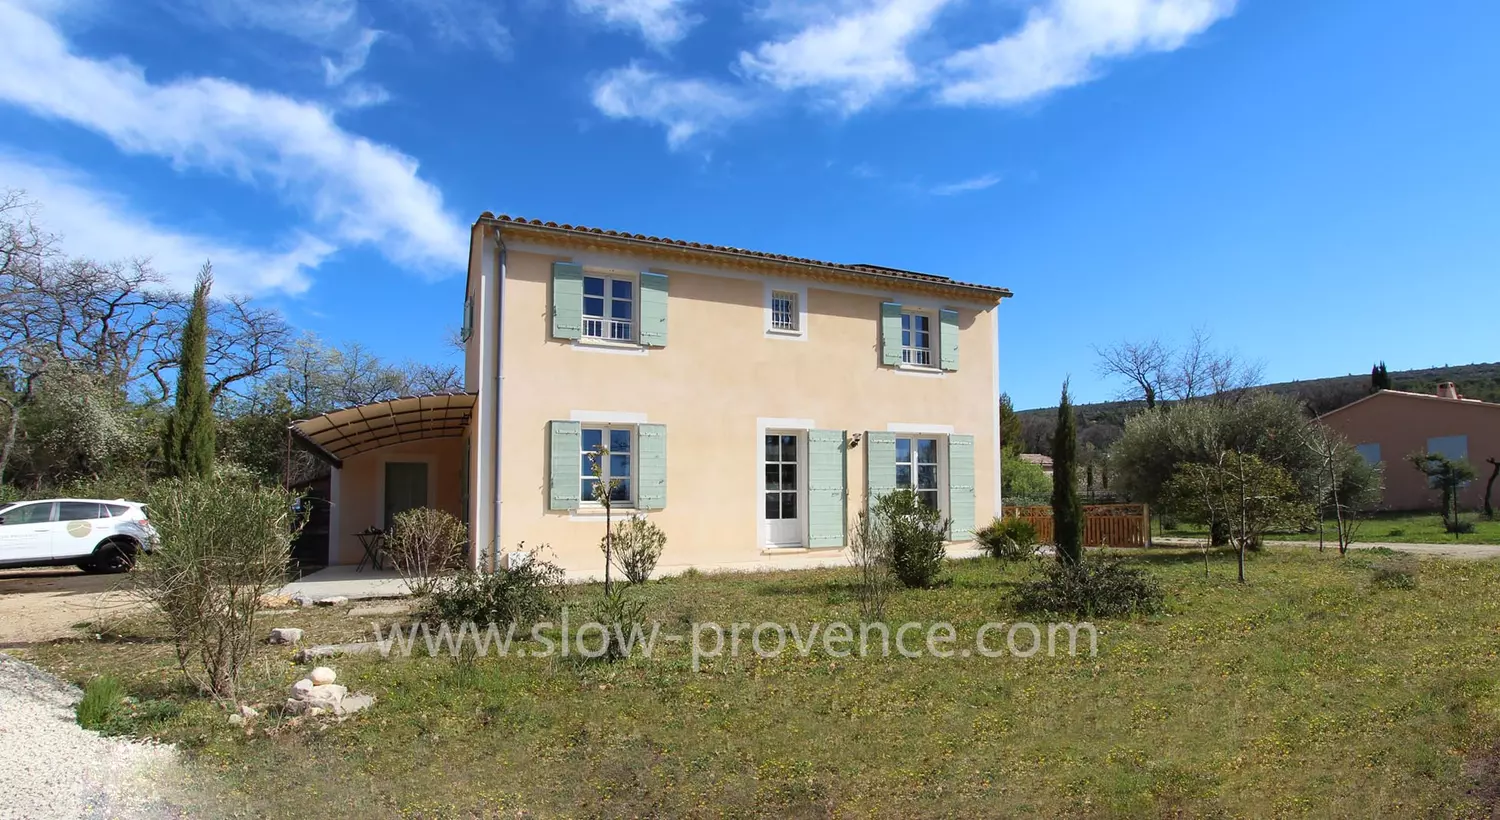 Dog-friendly holiday home near Mont Ventoux